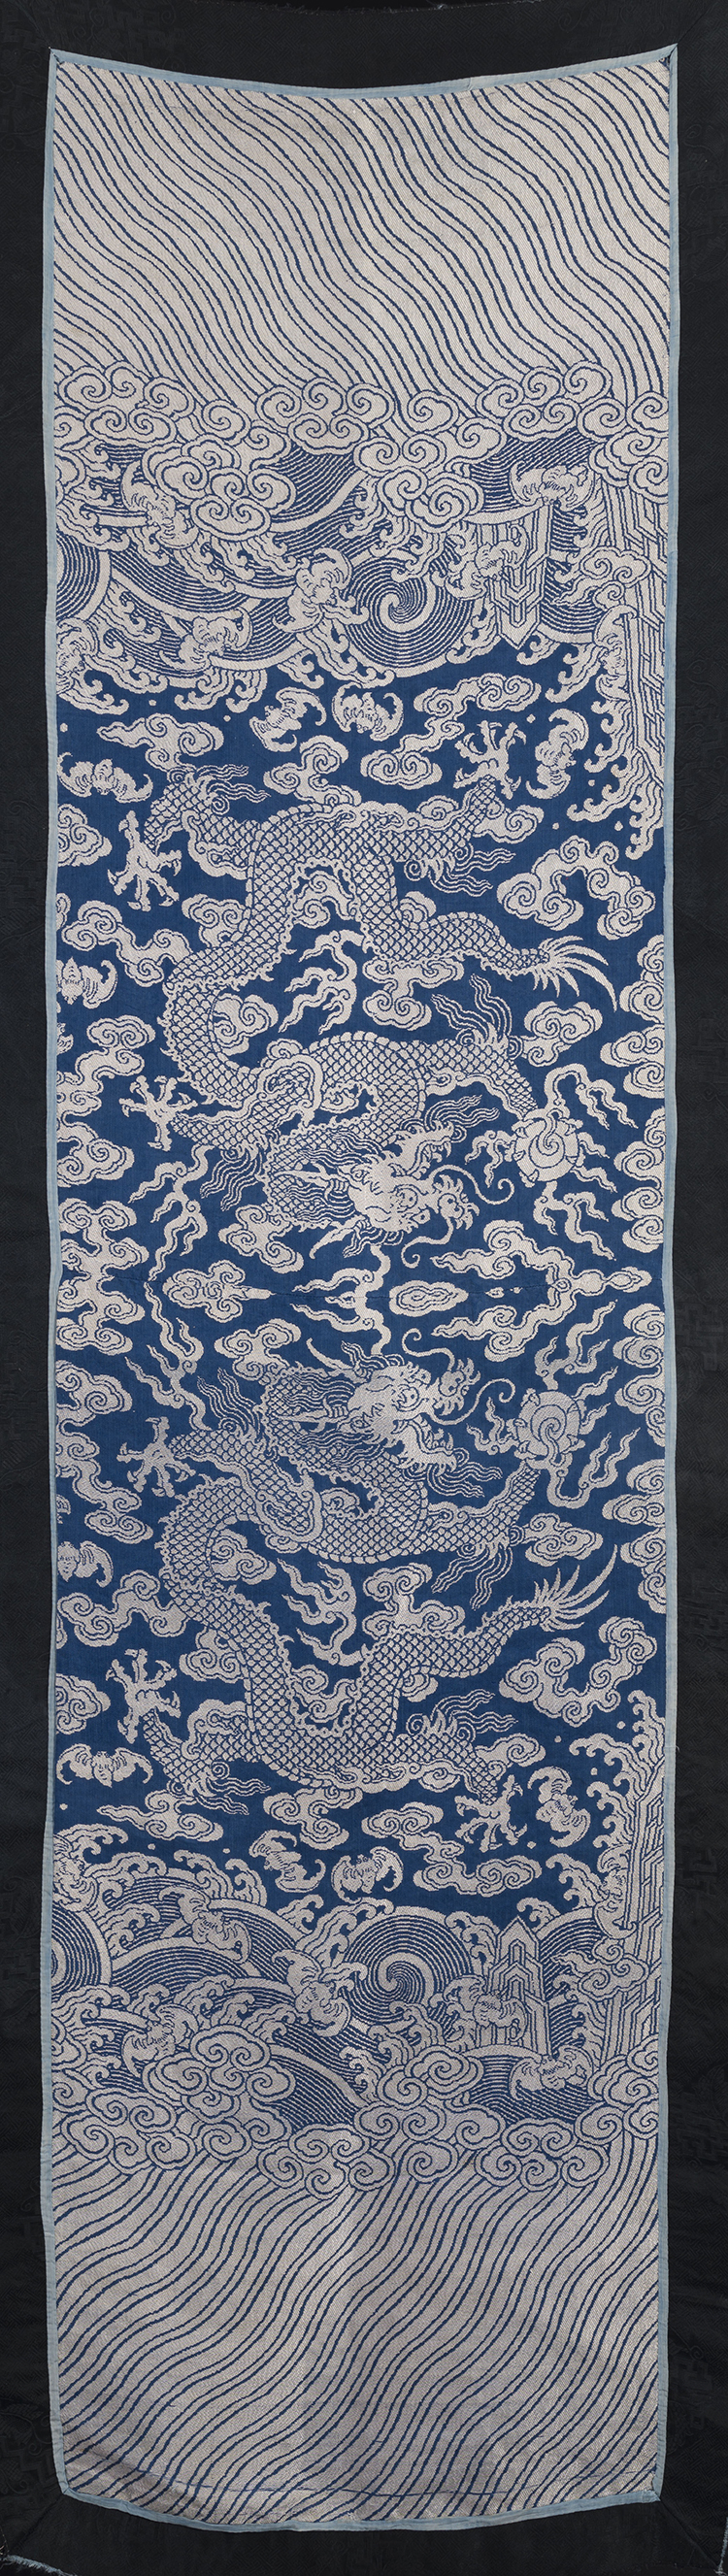 Two Chinese Silk Dragon Textiles, 19th Century by  Chinese Art